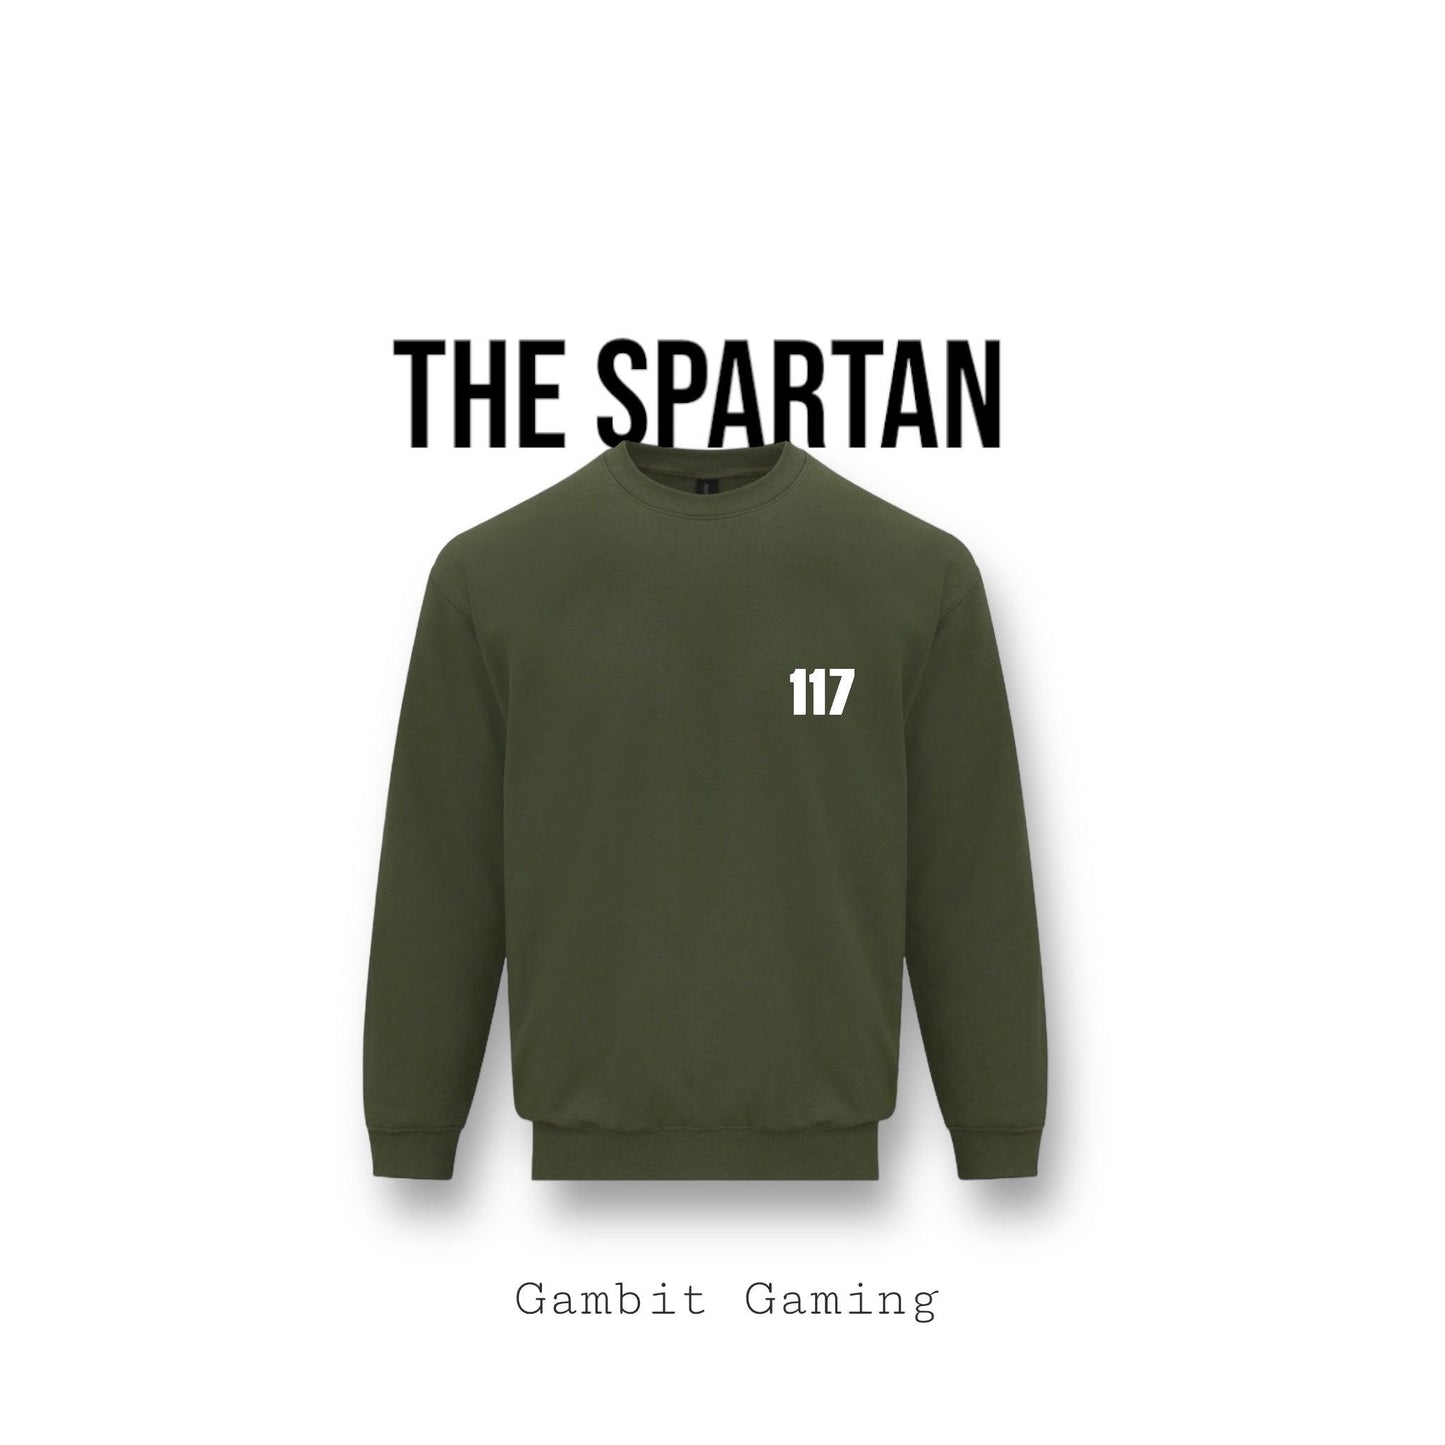 The Spartan Sweater - Gambit Gaming